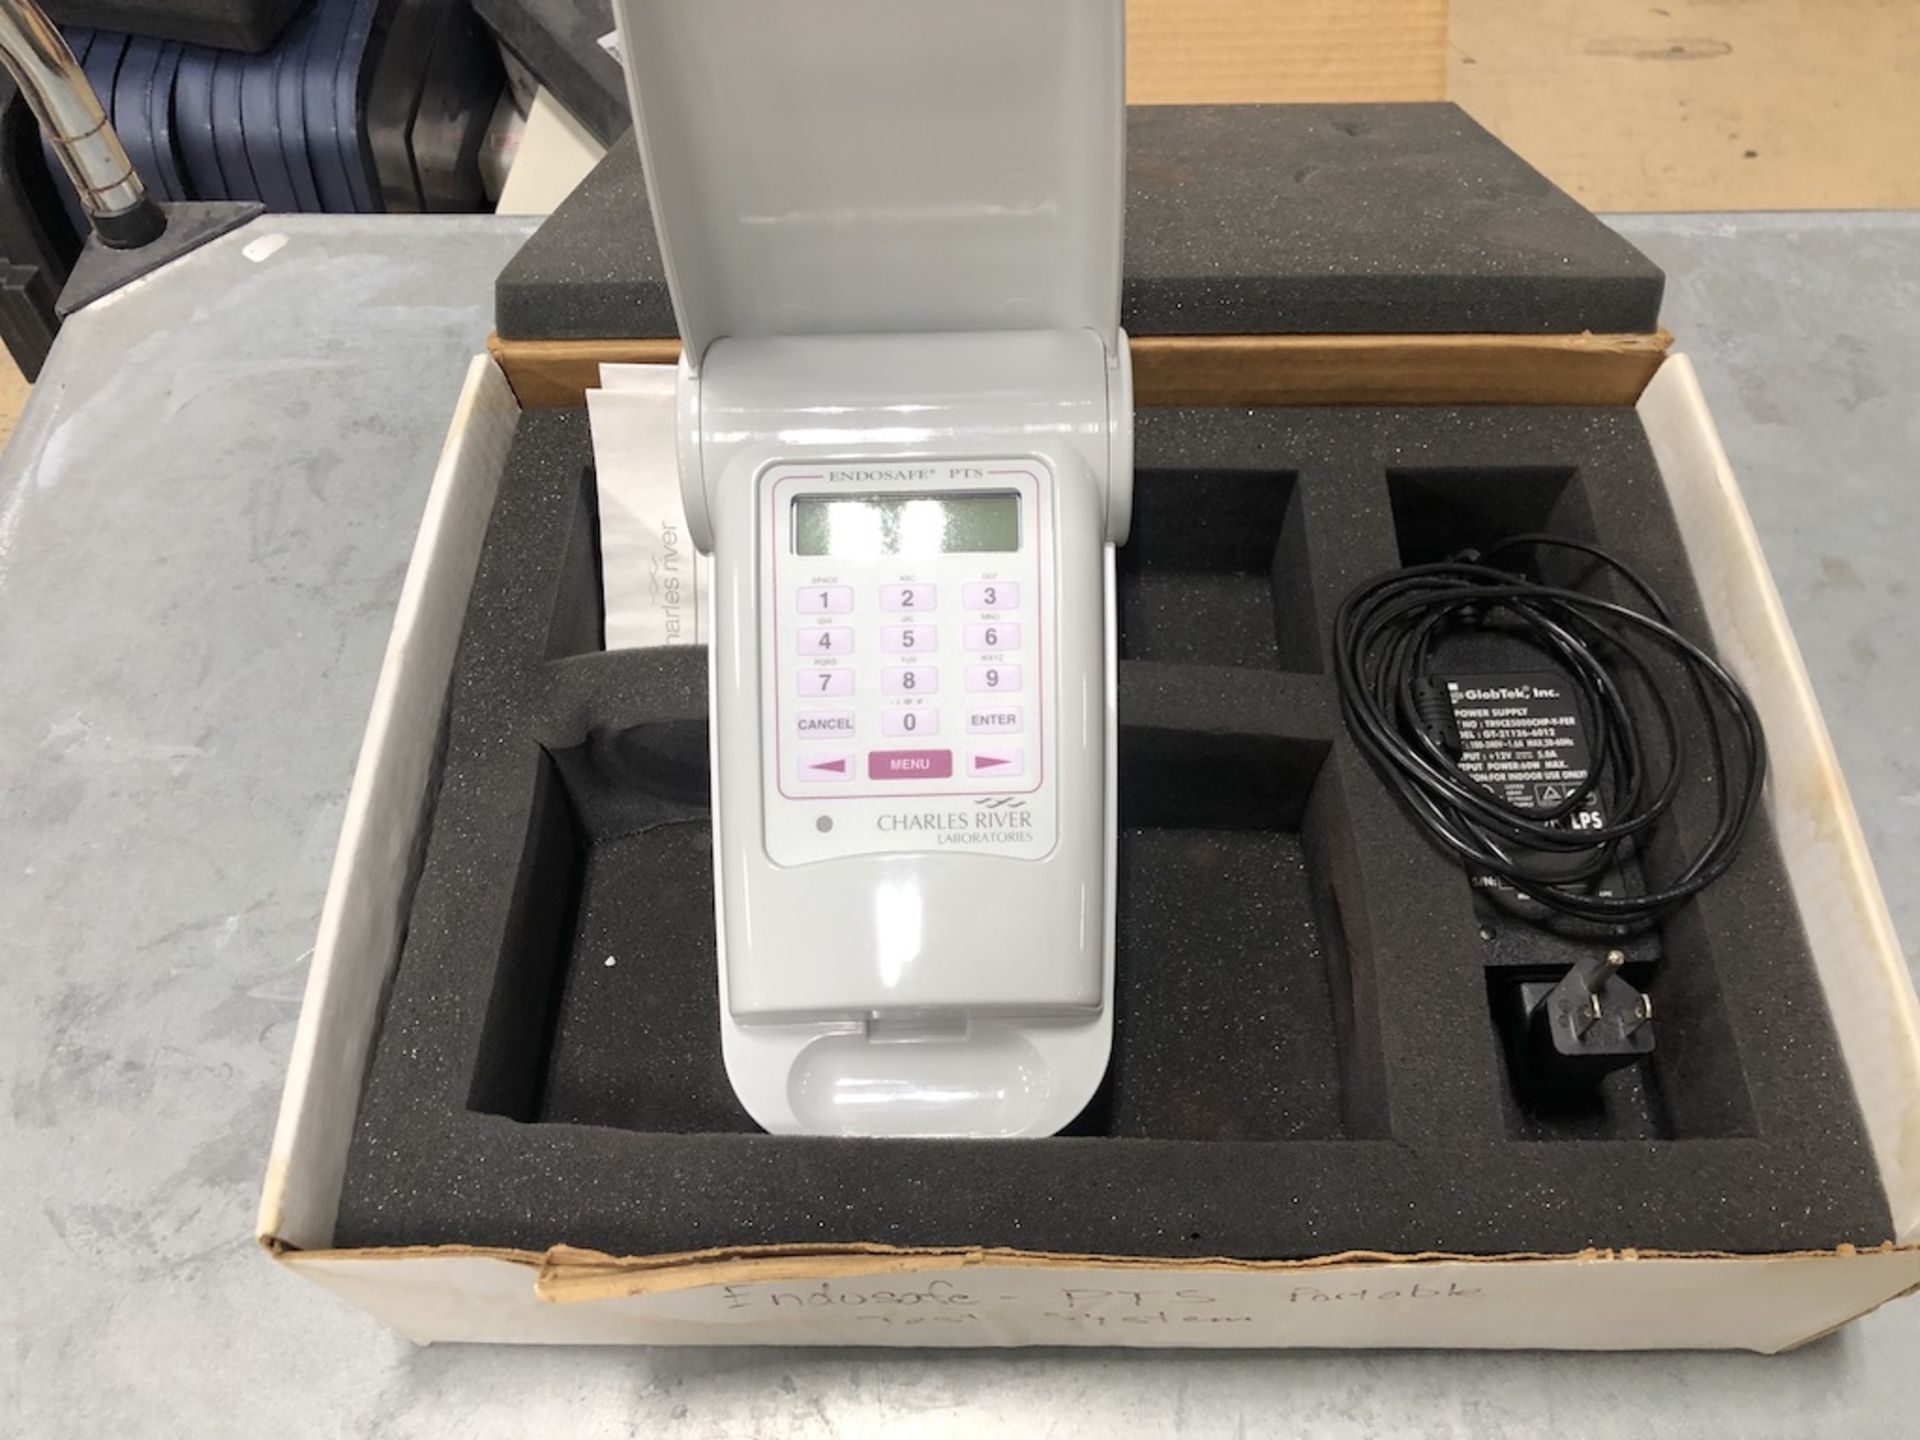 CHARLES RIVER LABORATORIES ENDOSAFE PTS PORTABLE TEST SYSTEM - Image 2 of 6